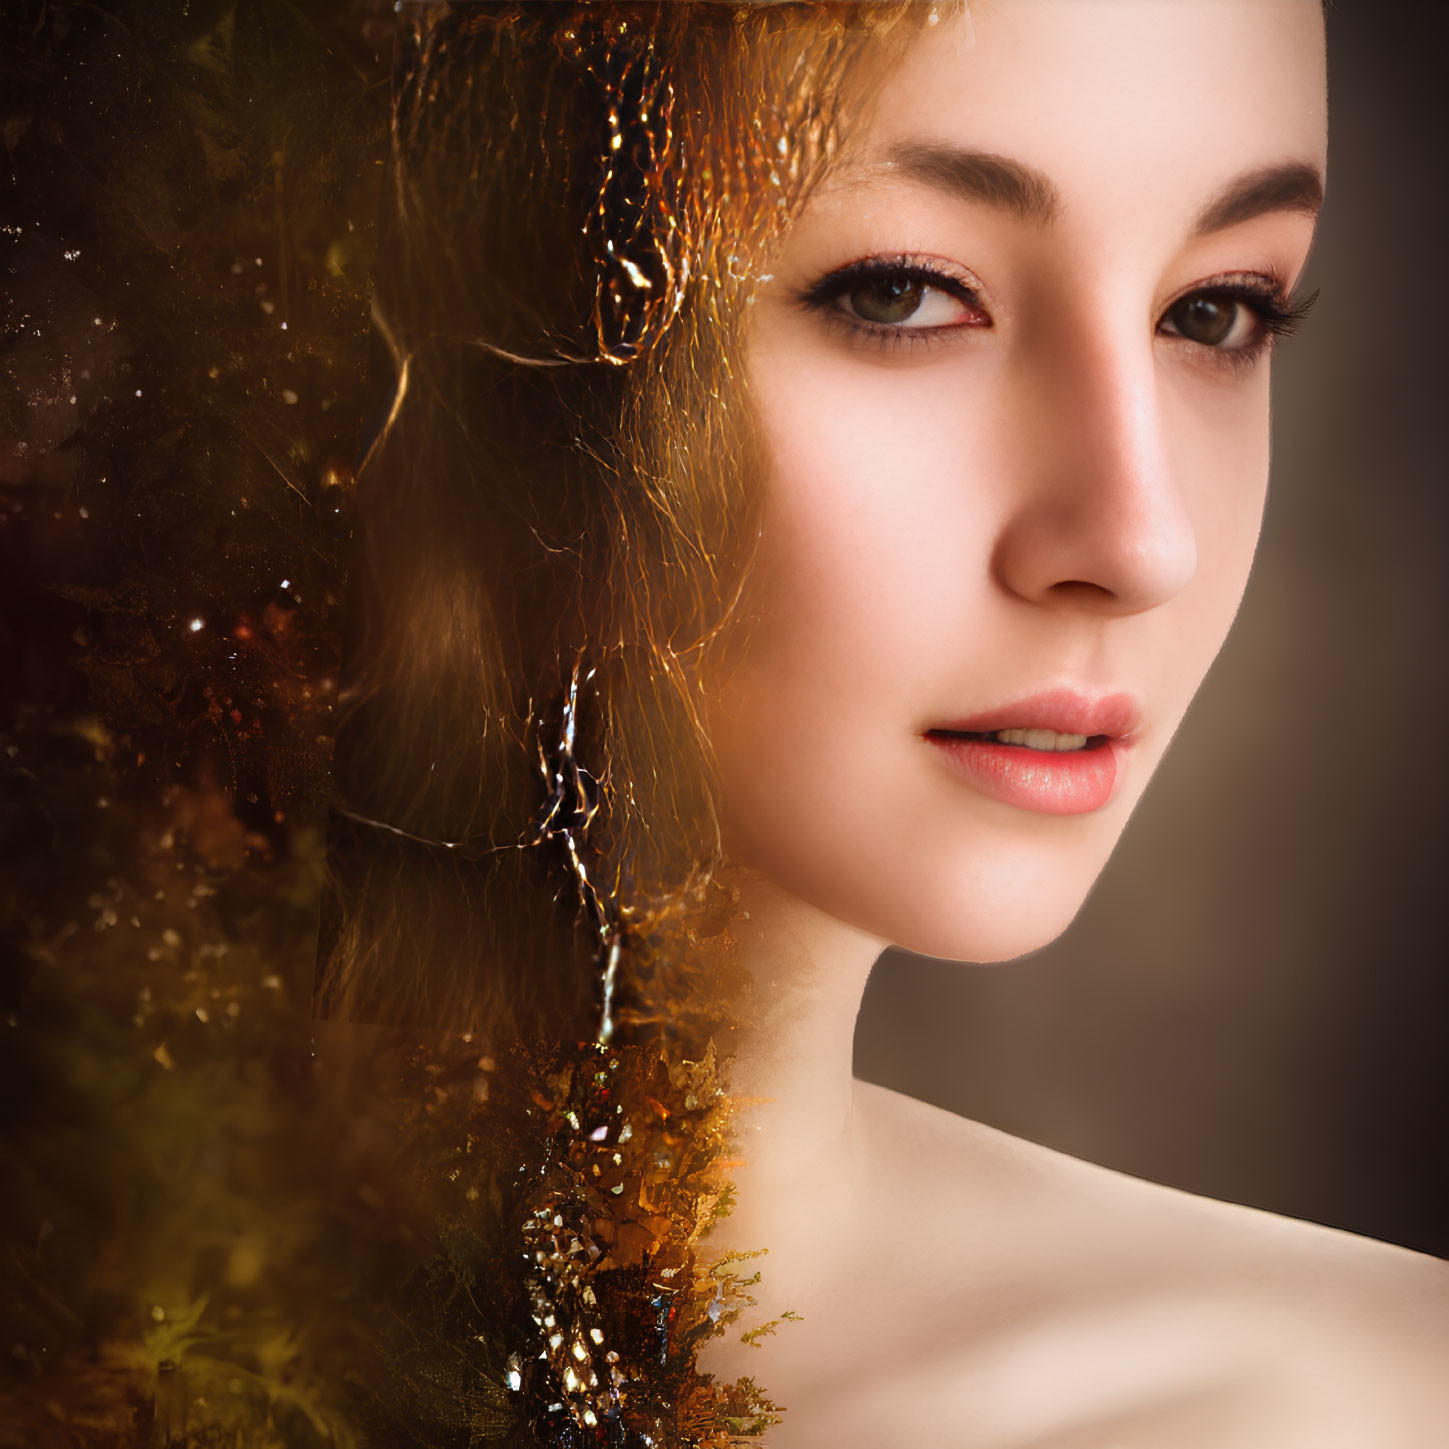 Portrait of Woman with Autumn Leaves Fusion and Elegant Jewelry